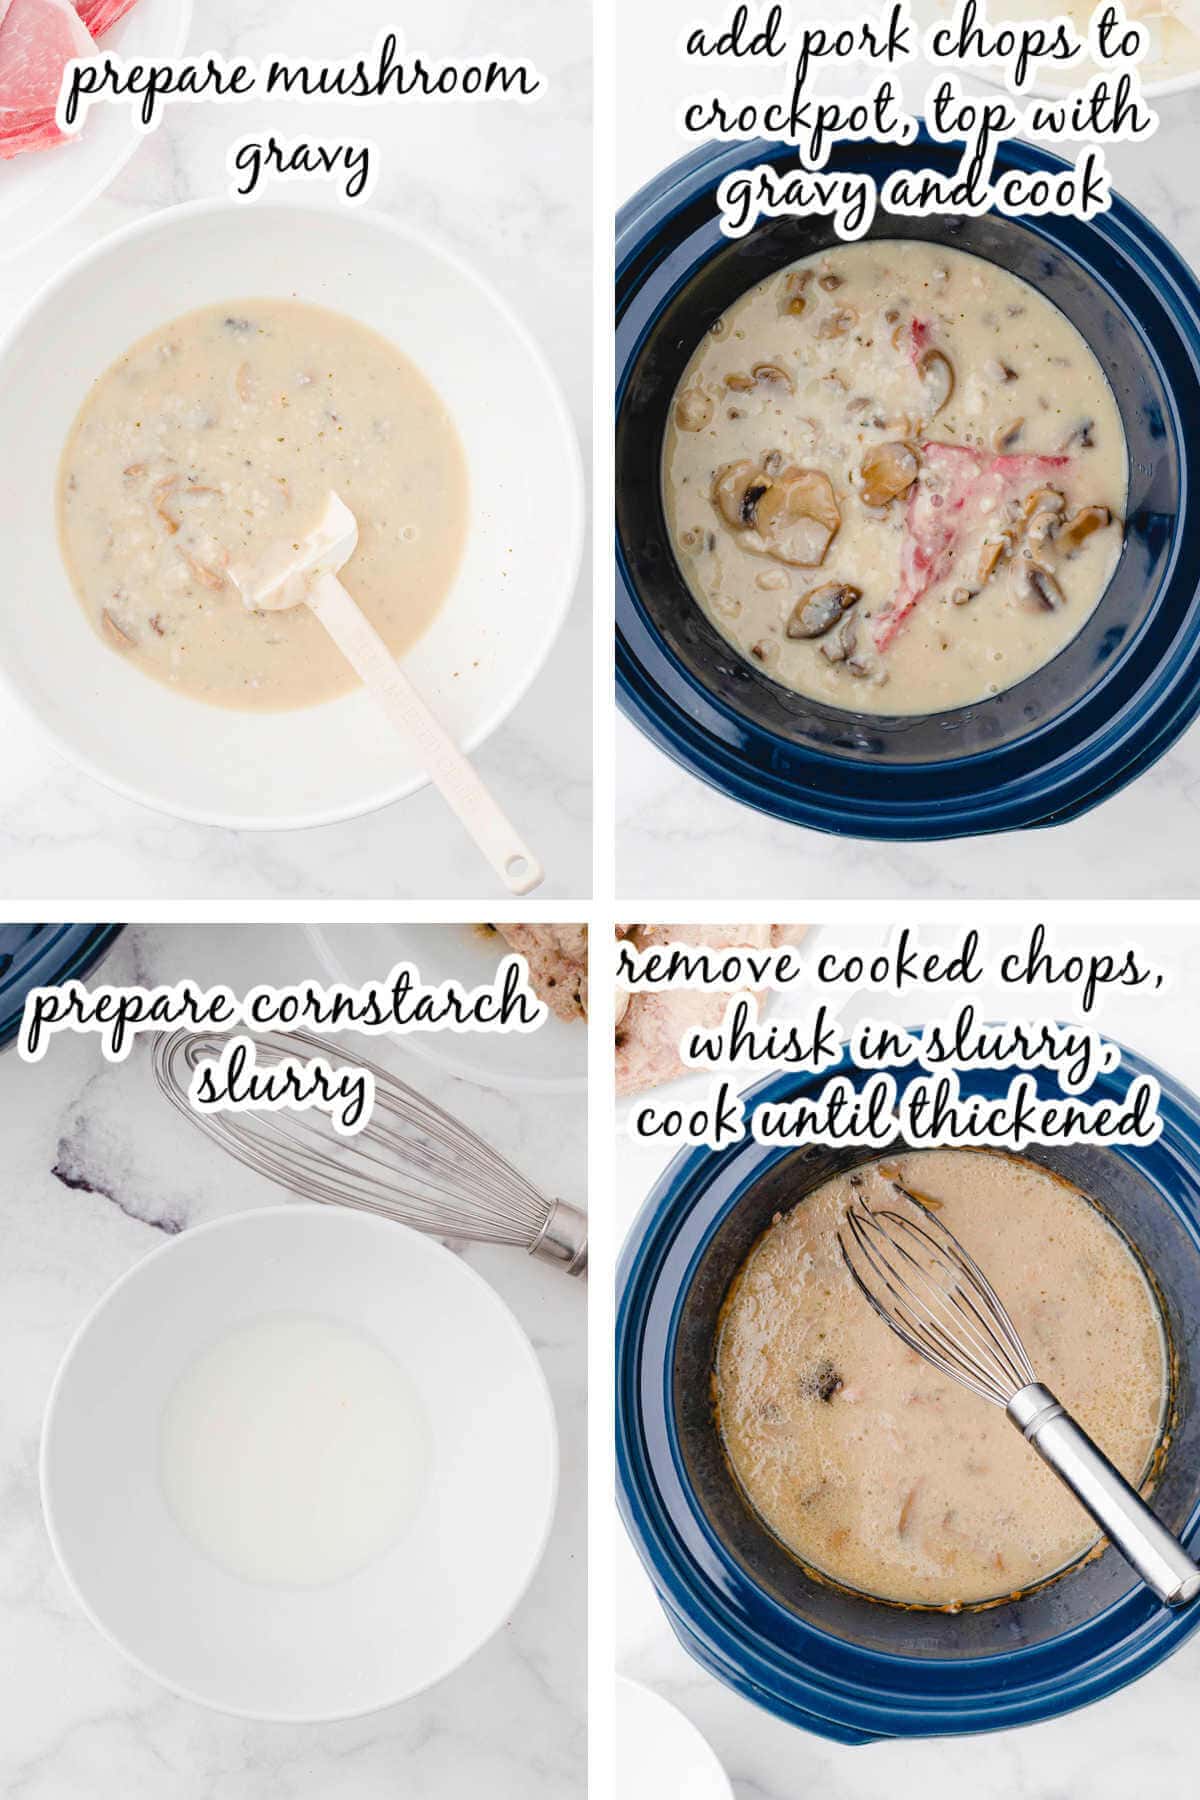 Collage of photos with step by step instructions to make recipe. With print overlay.